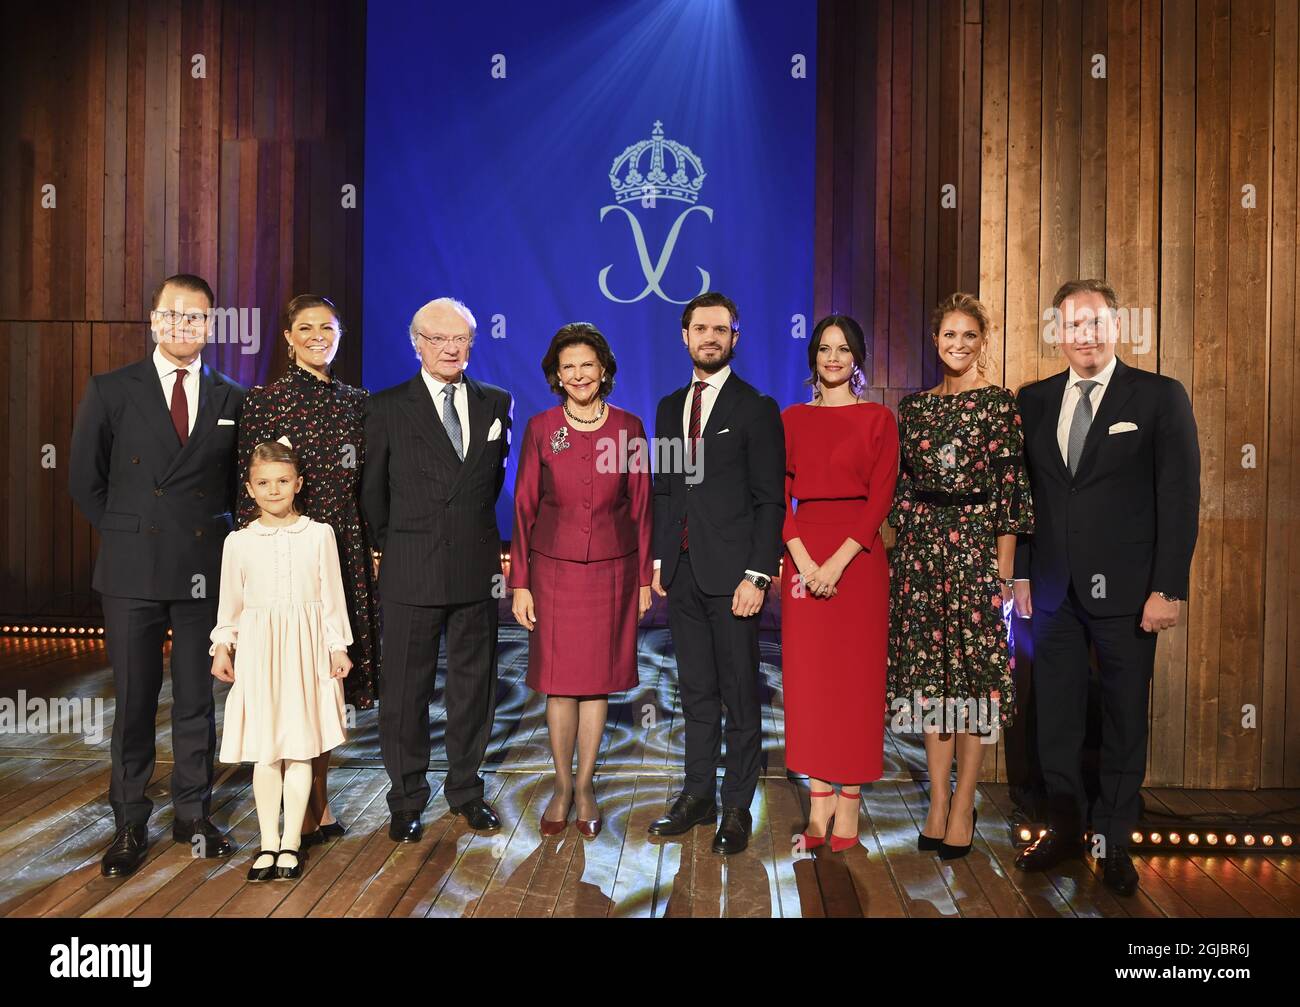 STOCKHOLM 2018-12-18 Prince Daniel Crown Princess Victoria, Princess Estelle, Queen Silvia, King Carl Gustaf, Princess Sofia, Prince Carl Philip, Princess Madeleine and Christopher O'Neill at seminar in connection with the Queen's 75th birthday at the Oscar Theatre in Stockholm on Tuesday. . Foto: Jonas Ekstromer / TT / kod 10030  Stock Photo